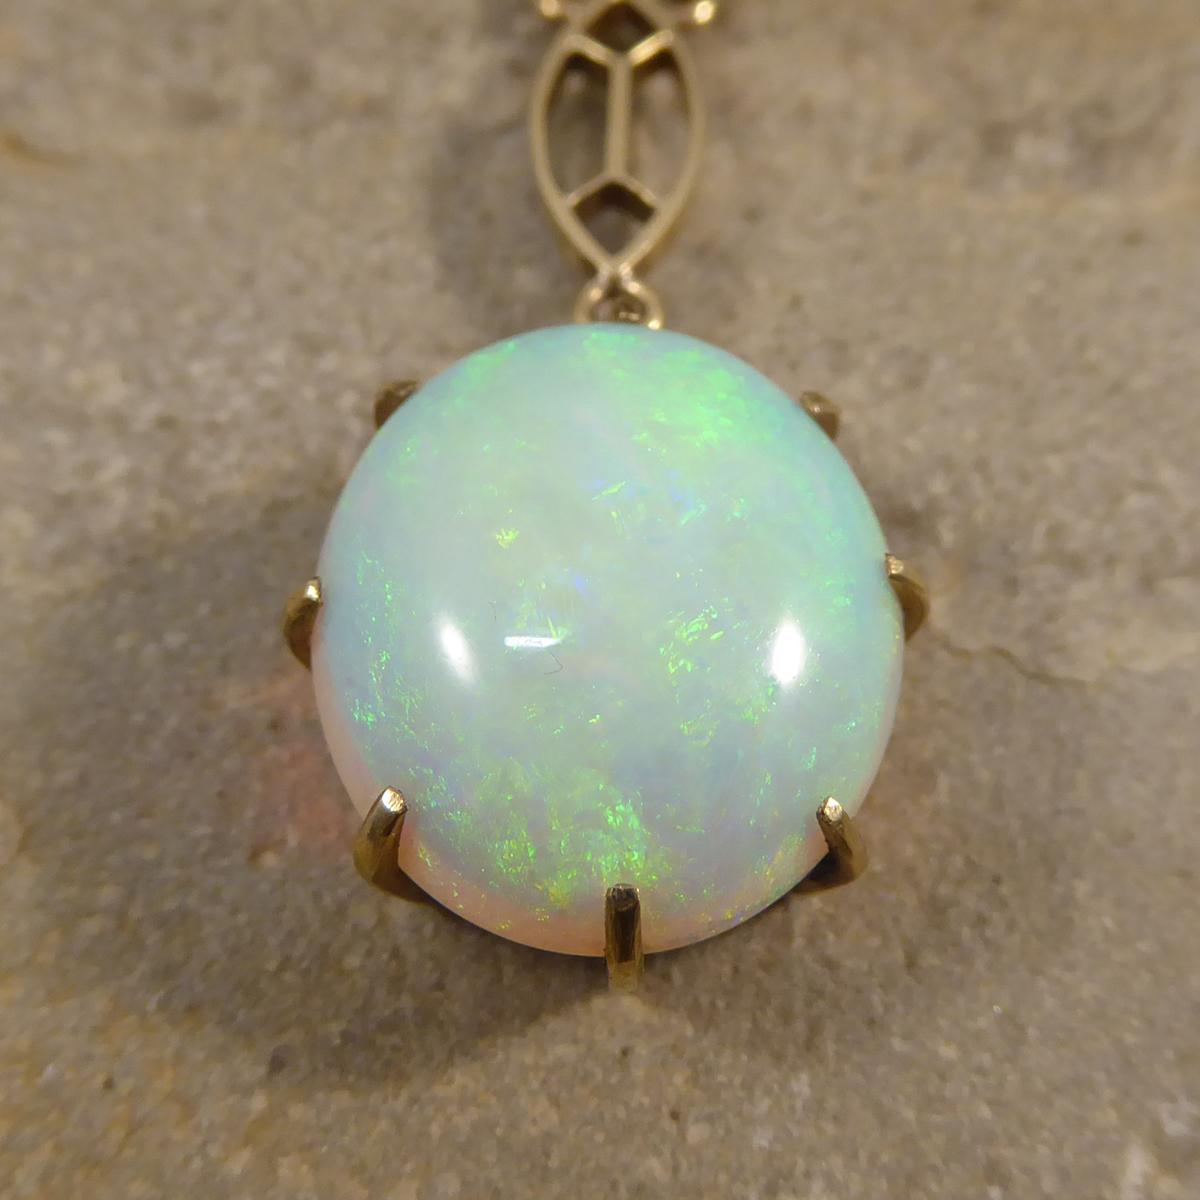 Vintage Single Opal Pendant Necklace on Bail Linked 9 Carat Yellow Gold Chain 1